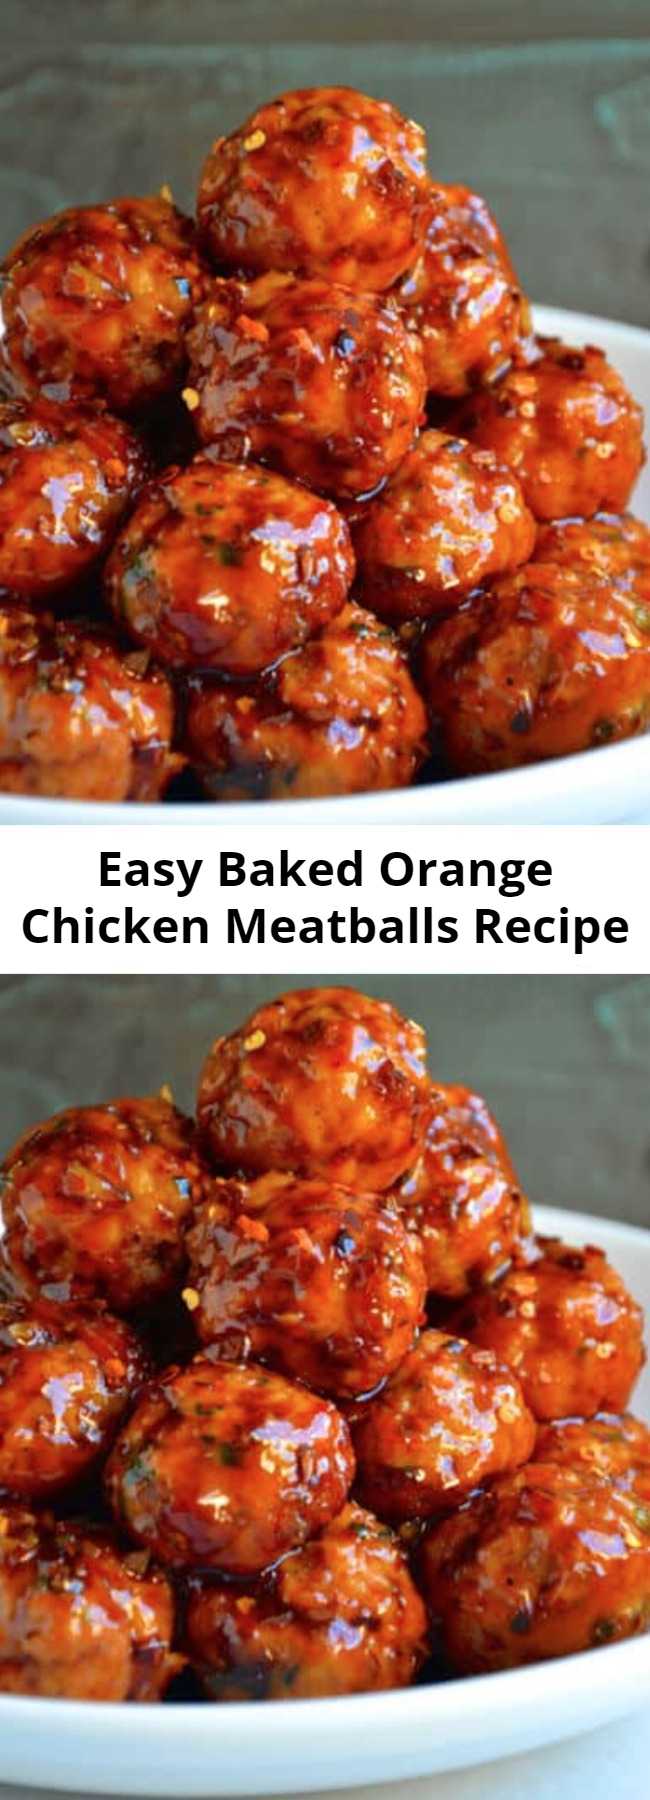 Easy Baked Orange Chicken Meatballs Recipe - Best of all, these meatballs will be on your table in 30 minutes or less. They’re the perfect make-ahead weeknight meal, a school lunch standout, and the ultimate entrée to pair with homemade fried rice and chocolate-dipped fortune cookies. A fake-out for takeout has never been easier!